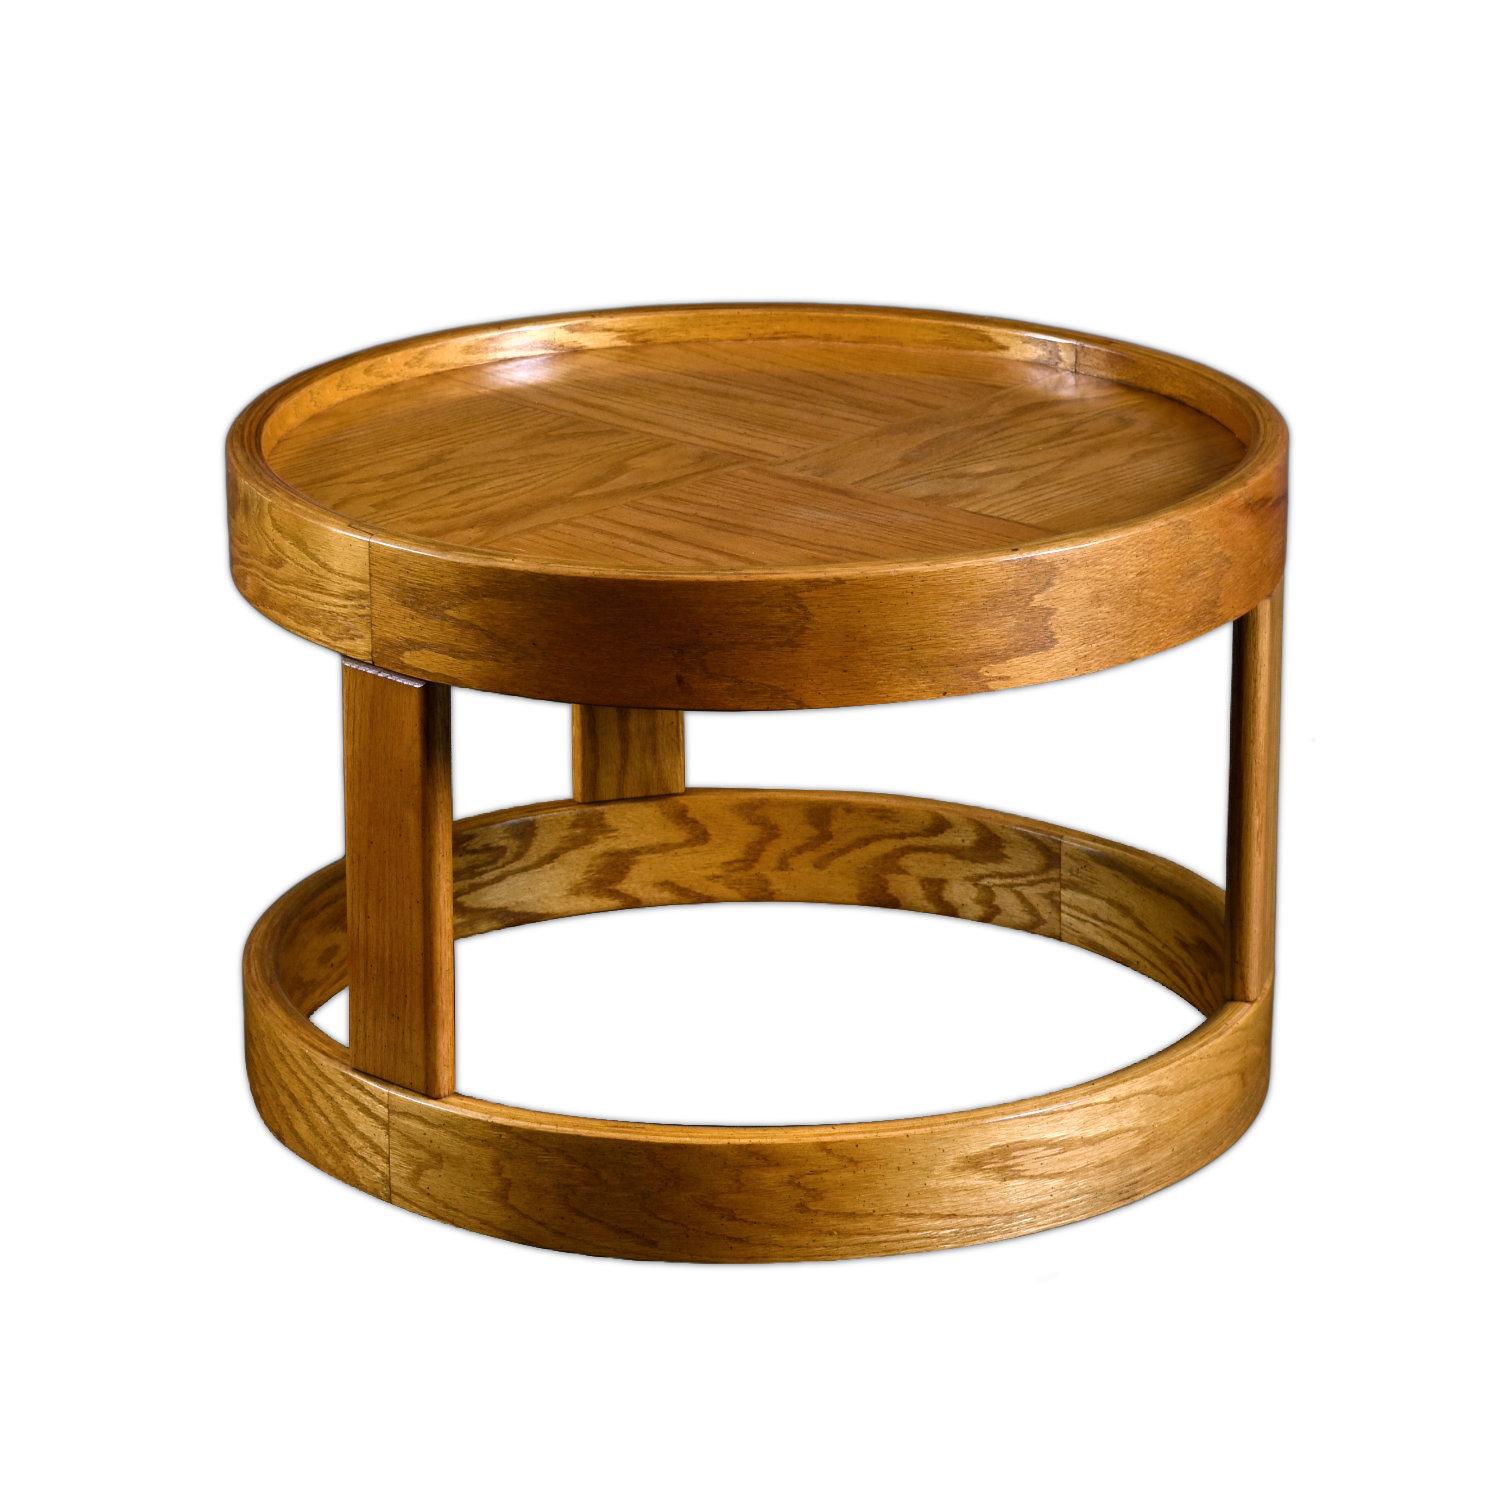 Round Parquet Solid Oak Coffee Table or Side Table by Howard